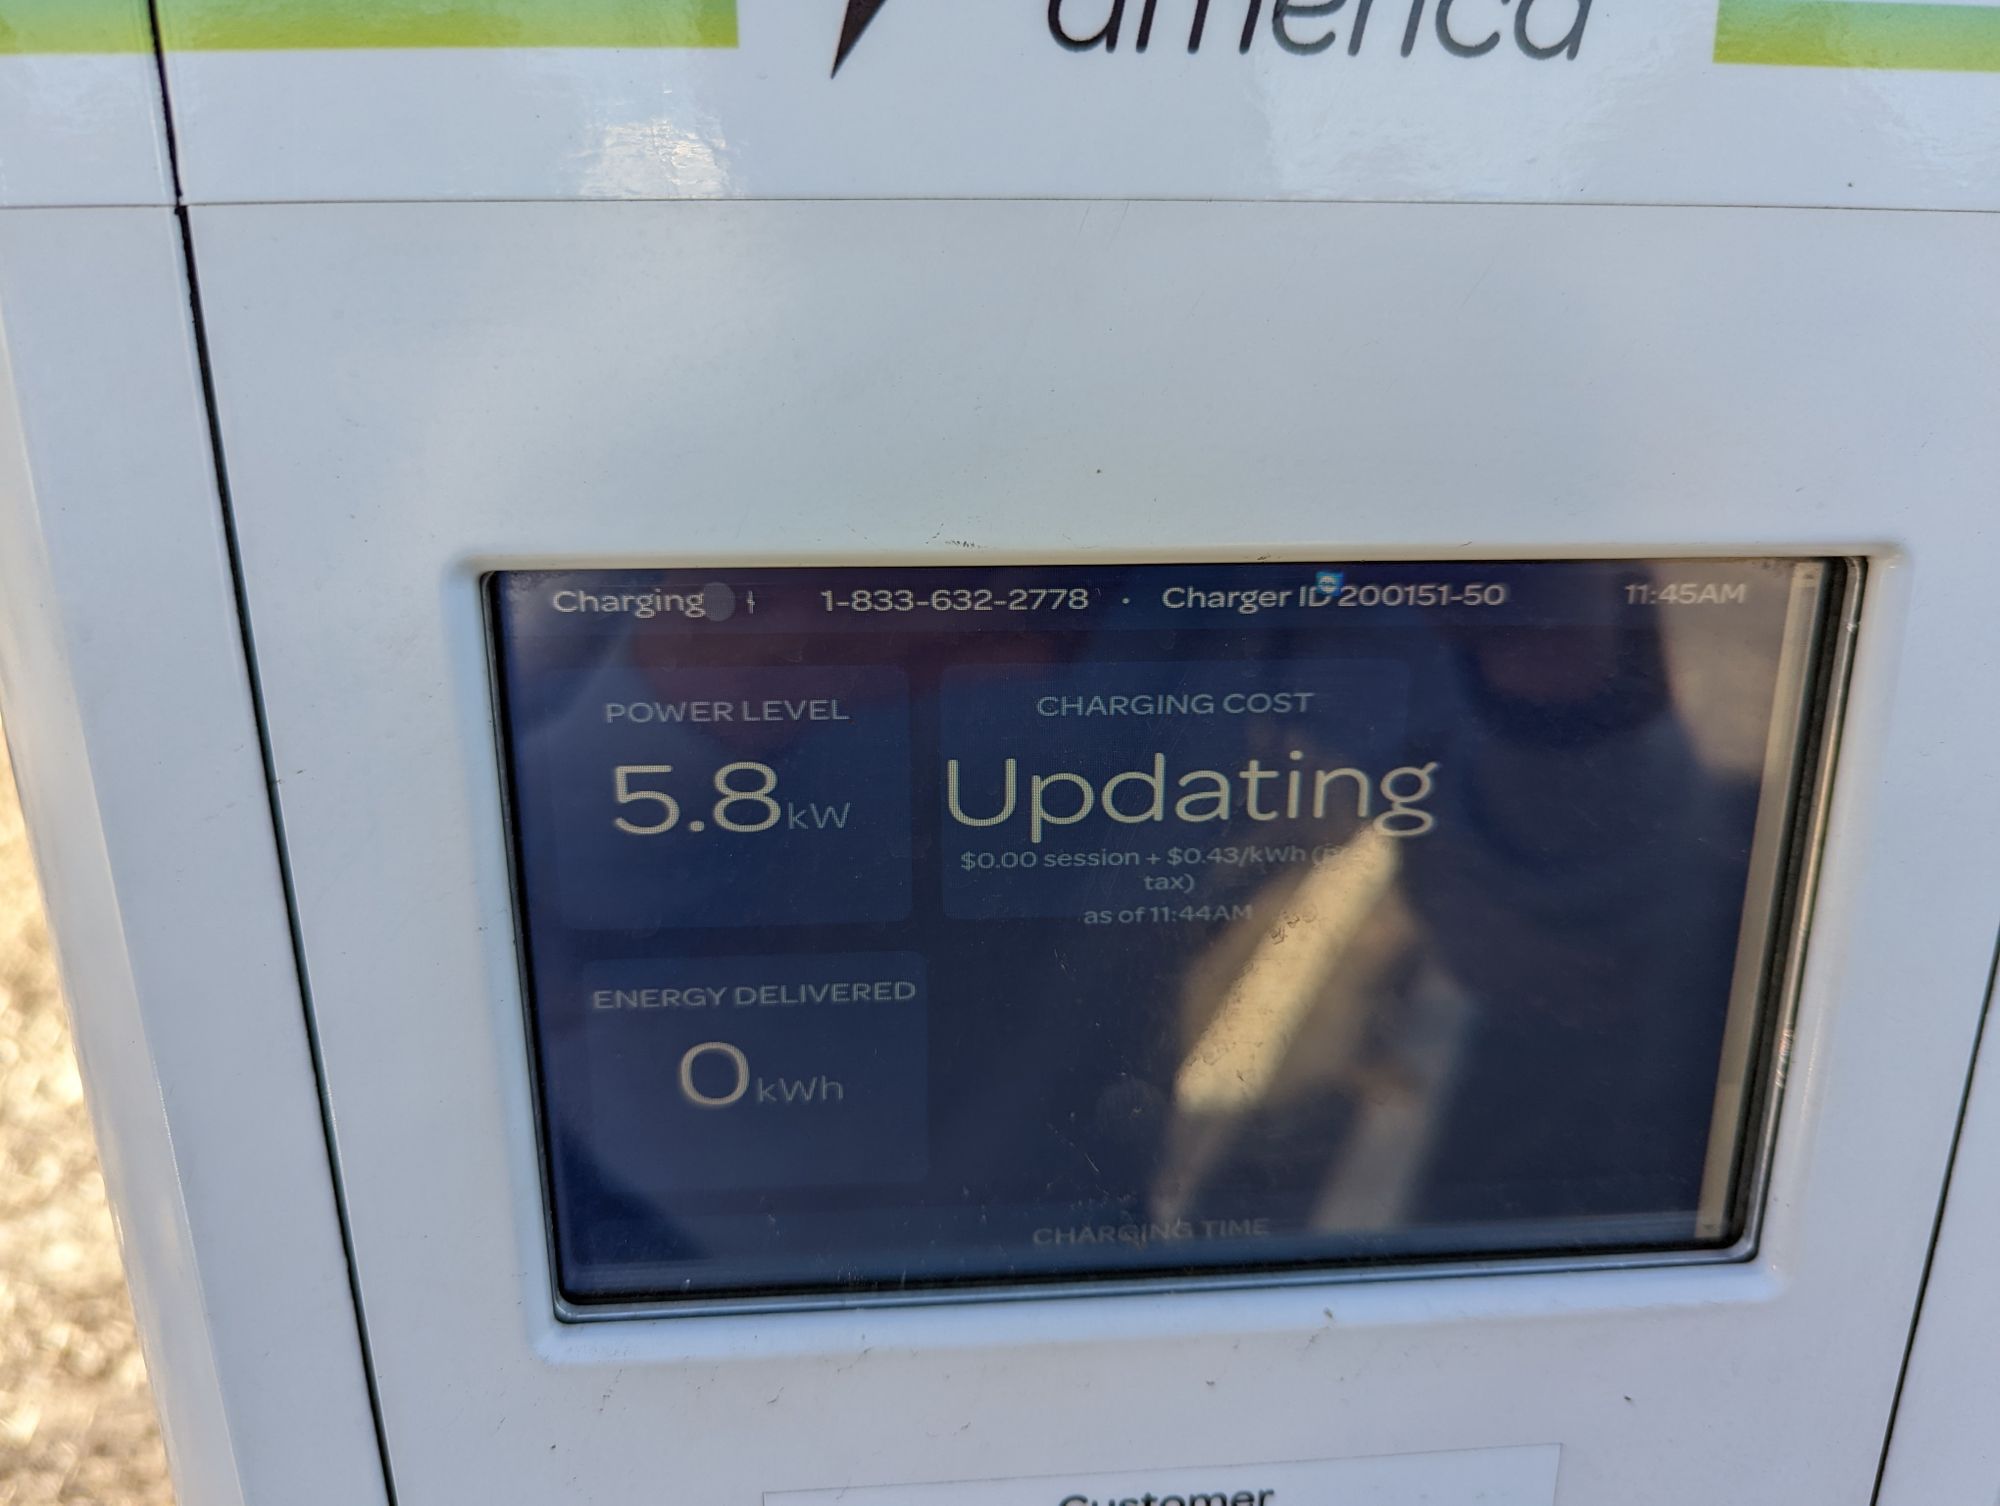 Electrify America charger display showing "Updating"